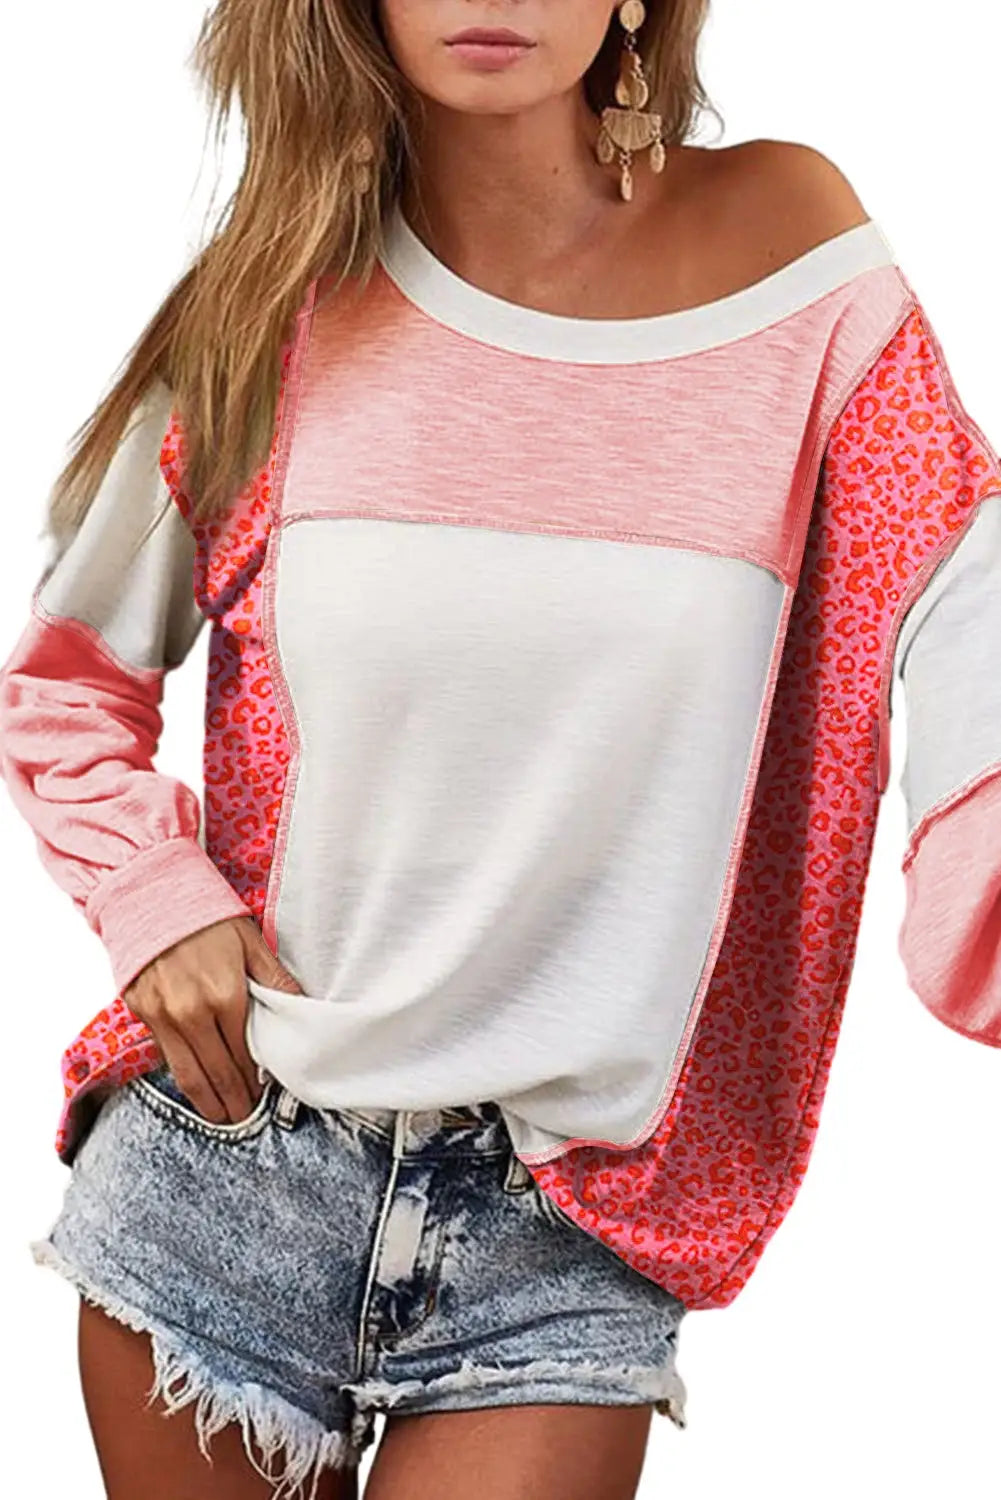 Peach blossom leopard color-block patchwork exposed seam top - long sleeve tops